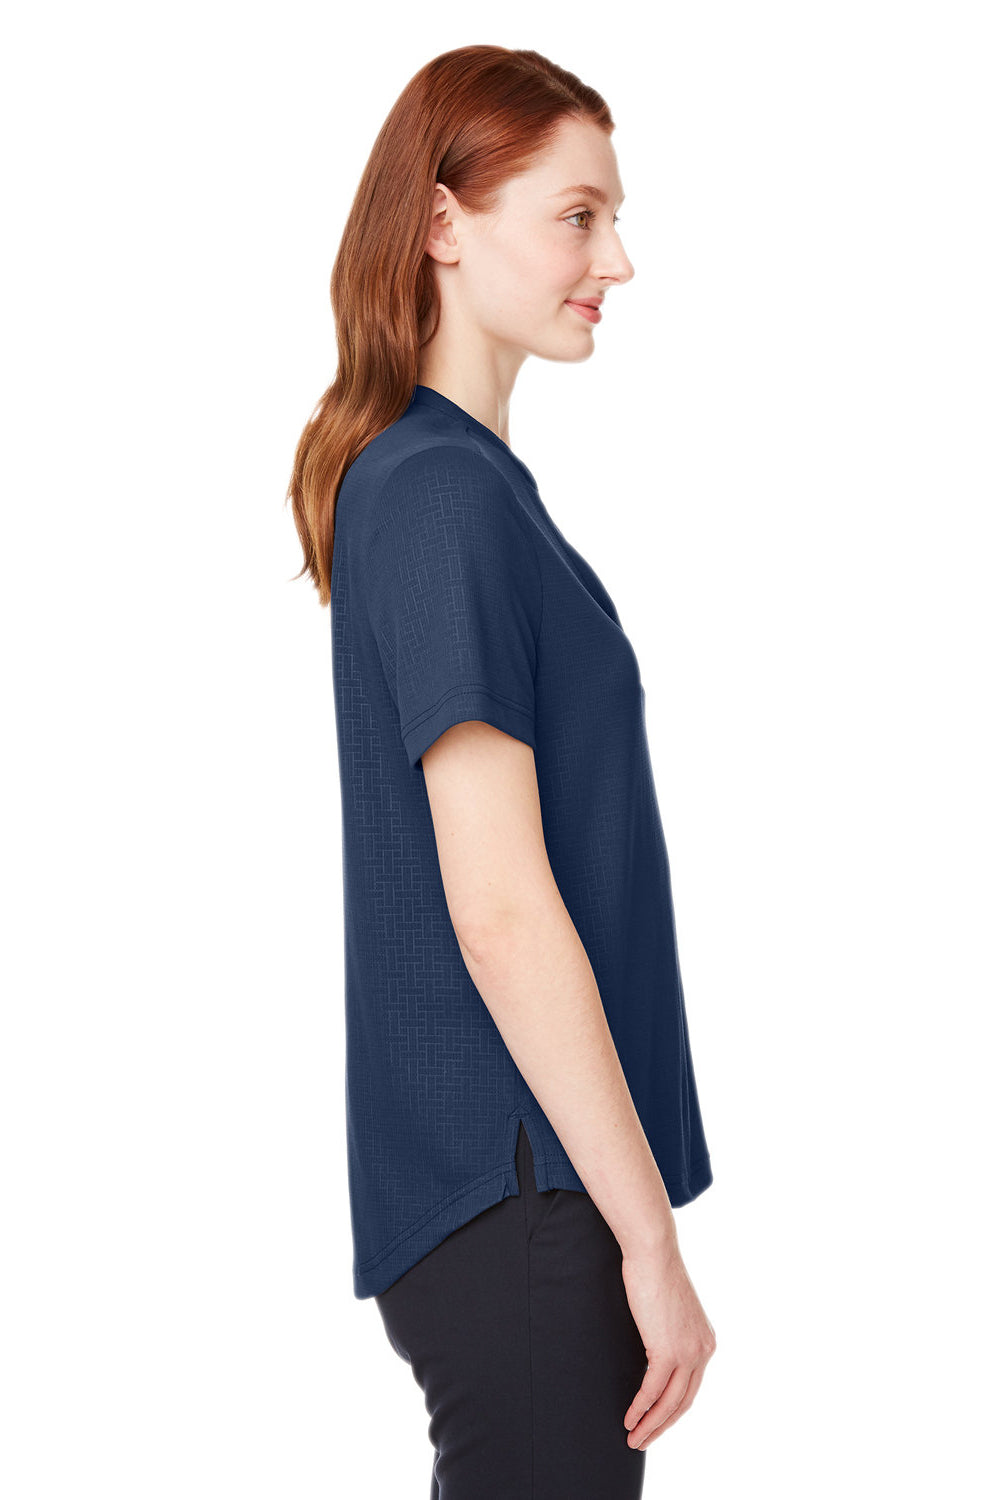 North End NE102W Womens Replay Recycled Short Sleeve Polo Shirt Classic Navy Blue Side